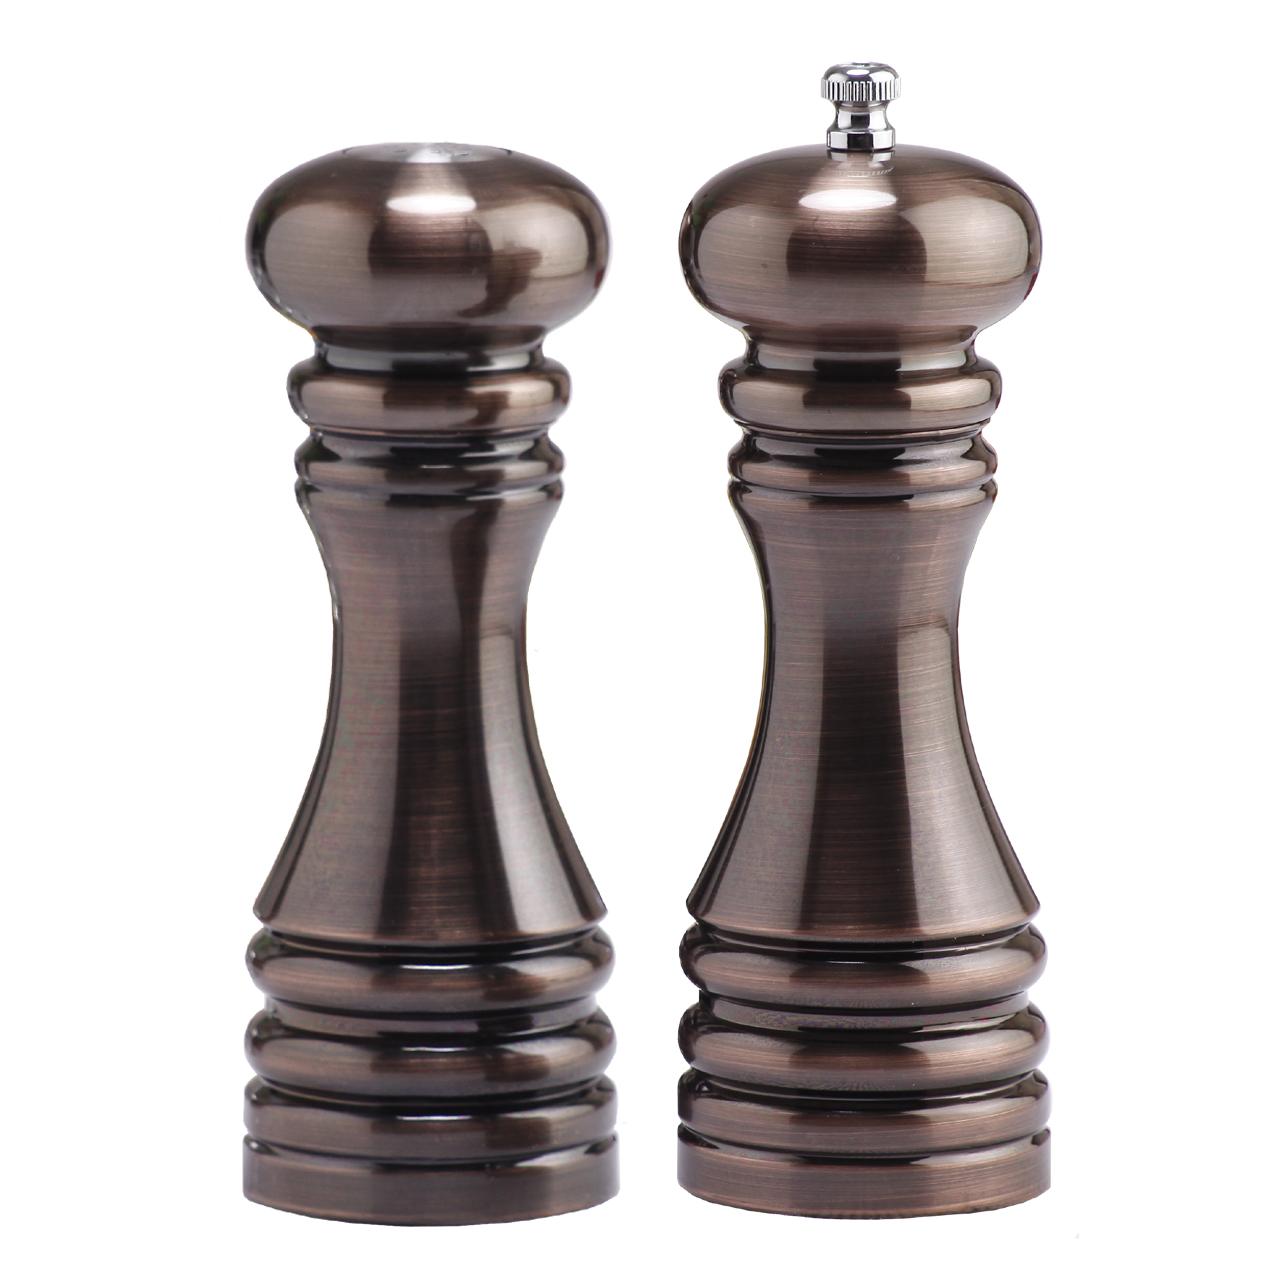 Picture for category Salt & Pepper Shakers